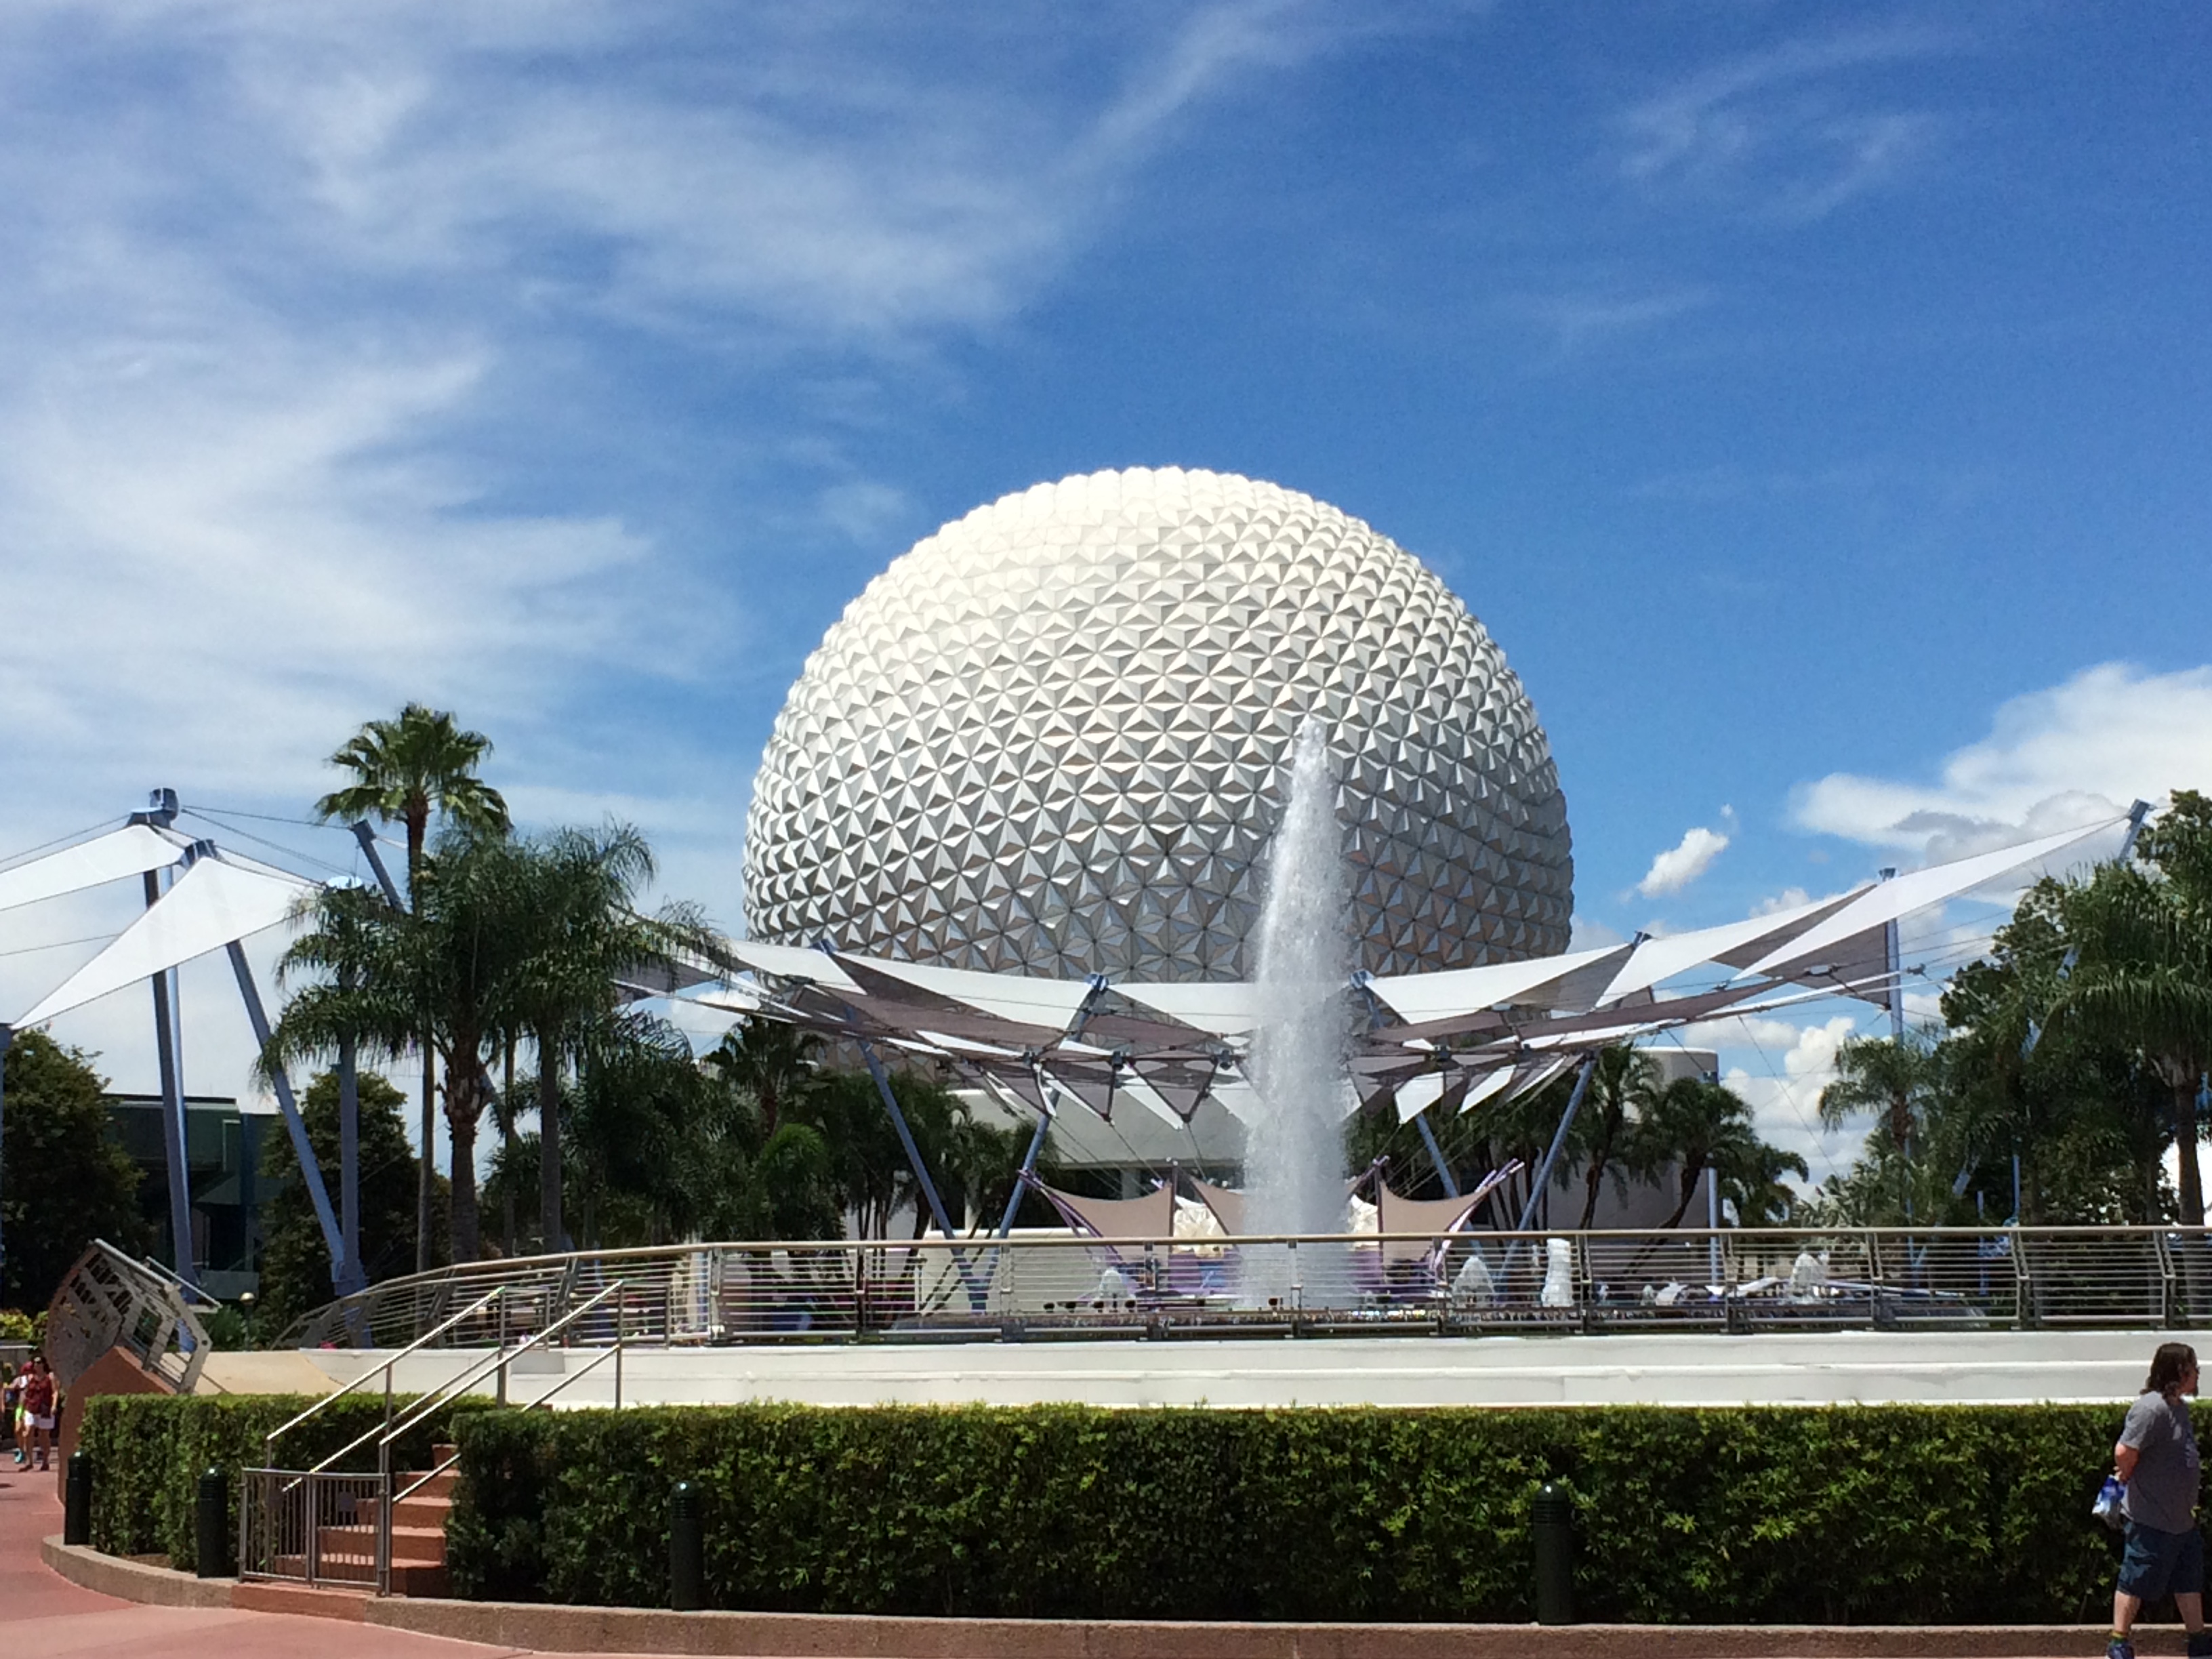 Special Events on October 1st for Epcot's 35th Anniversary Day